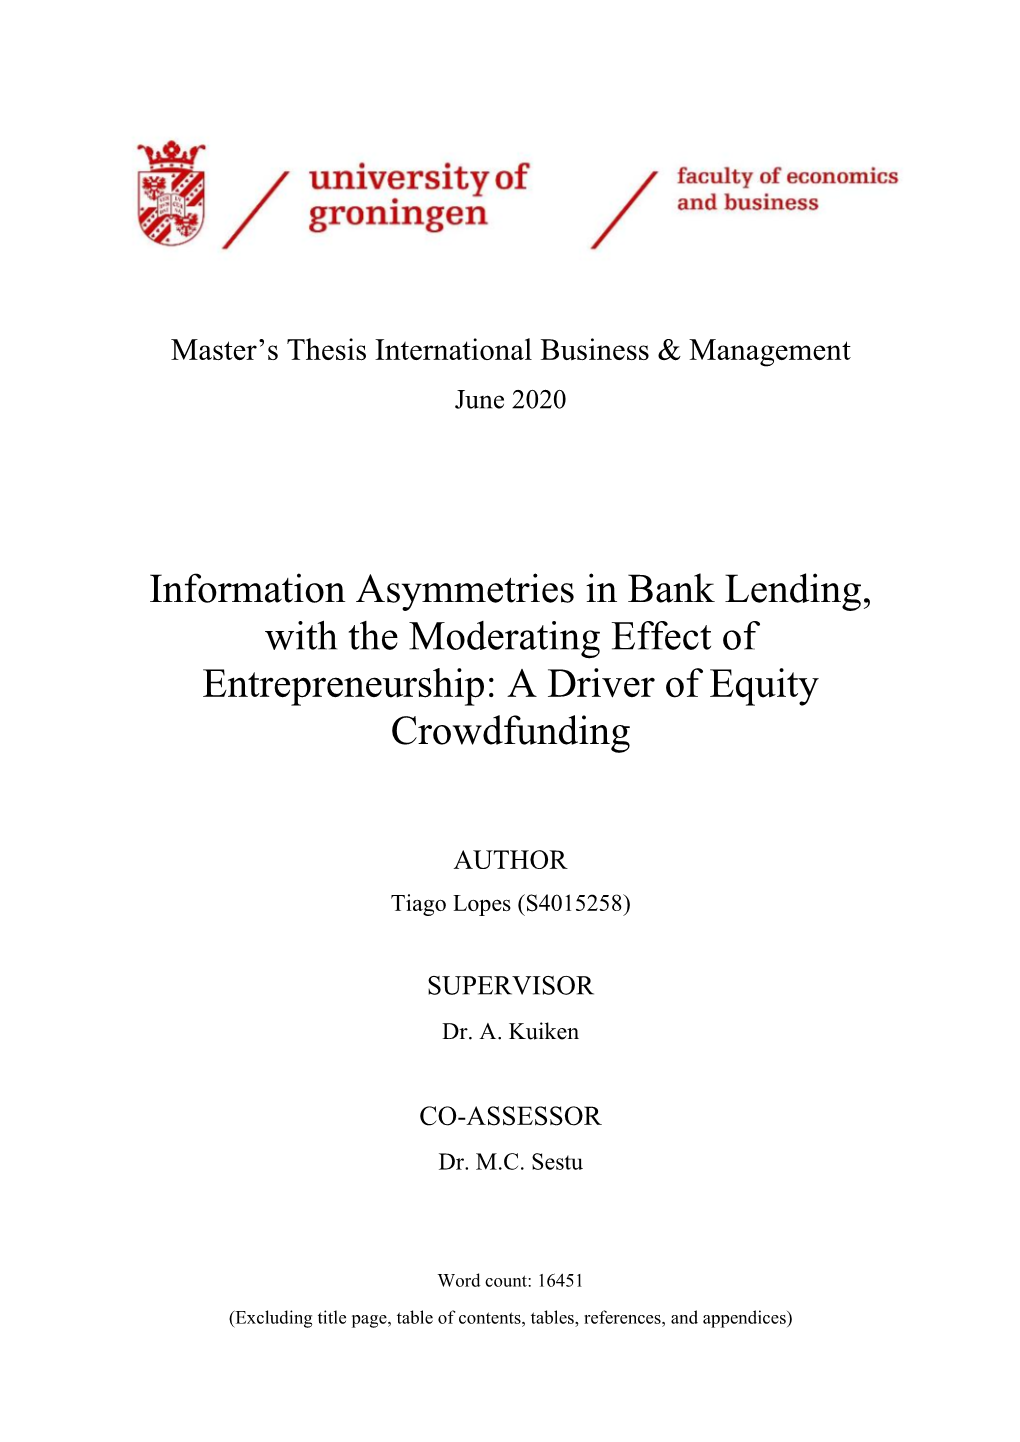 Information Asymmetries in Bank Lending, with the Moderating Effect of Entrepreneurship: a Driver of Equity Crowdfunding